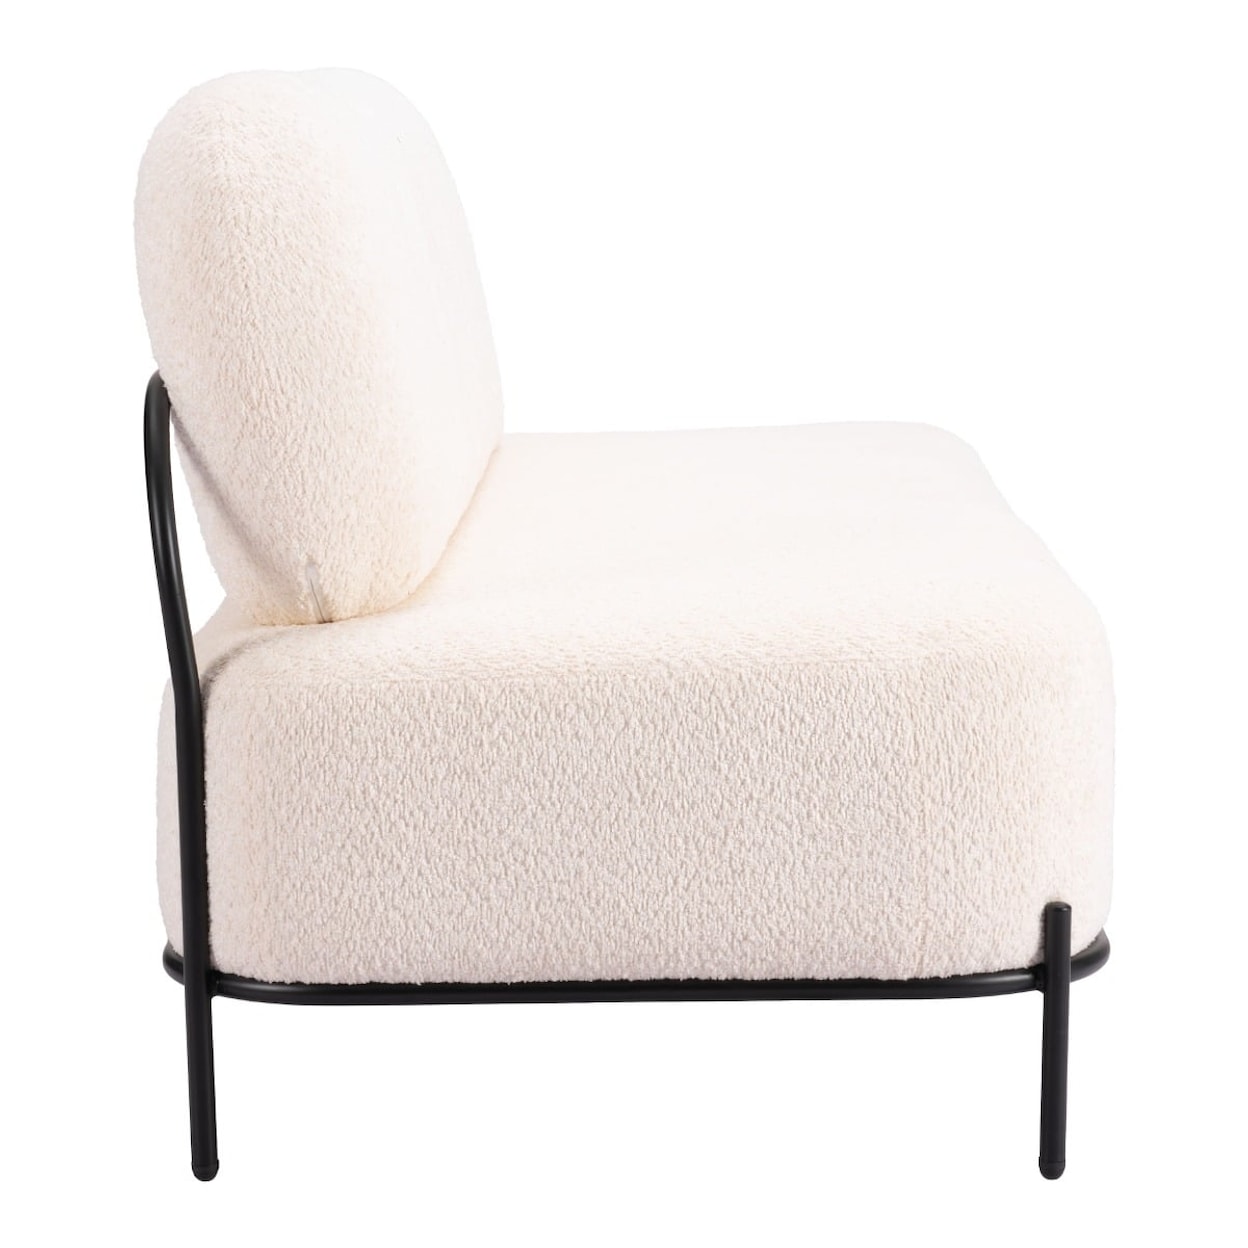 Zuo Arendal Collection Sofa